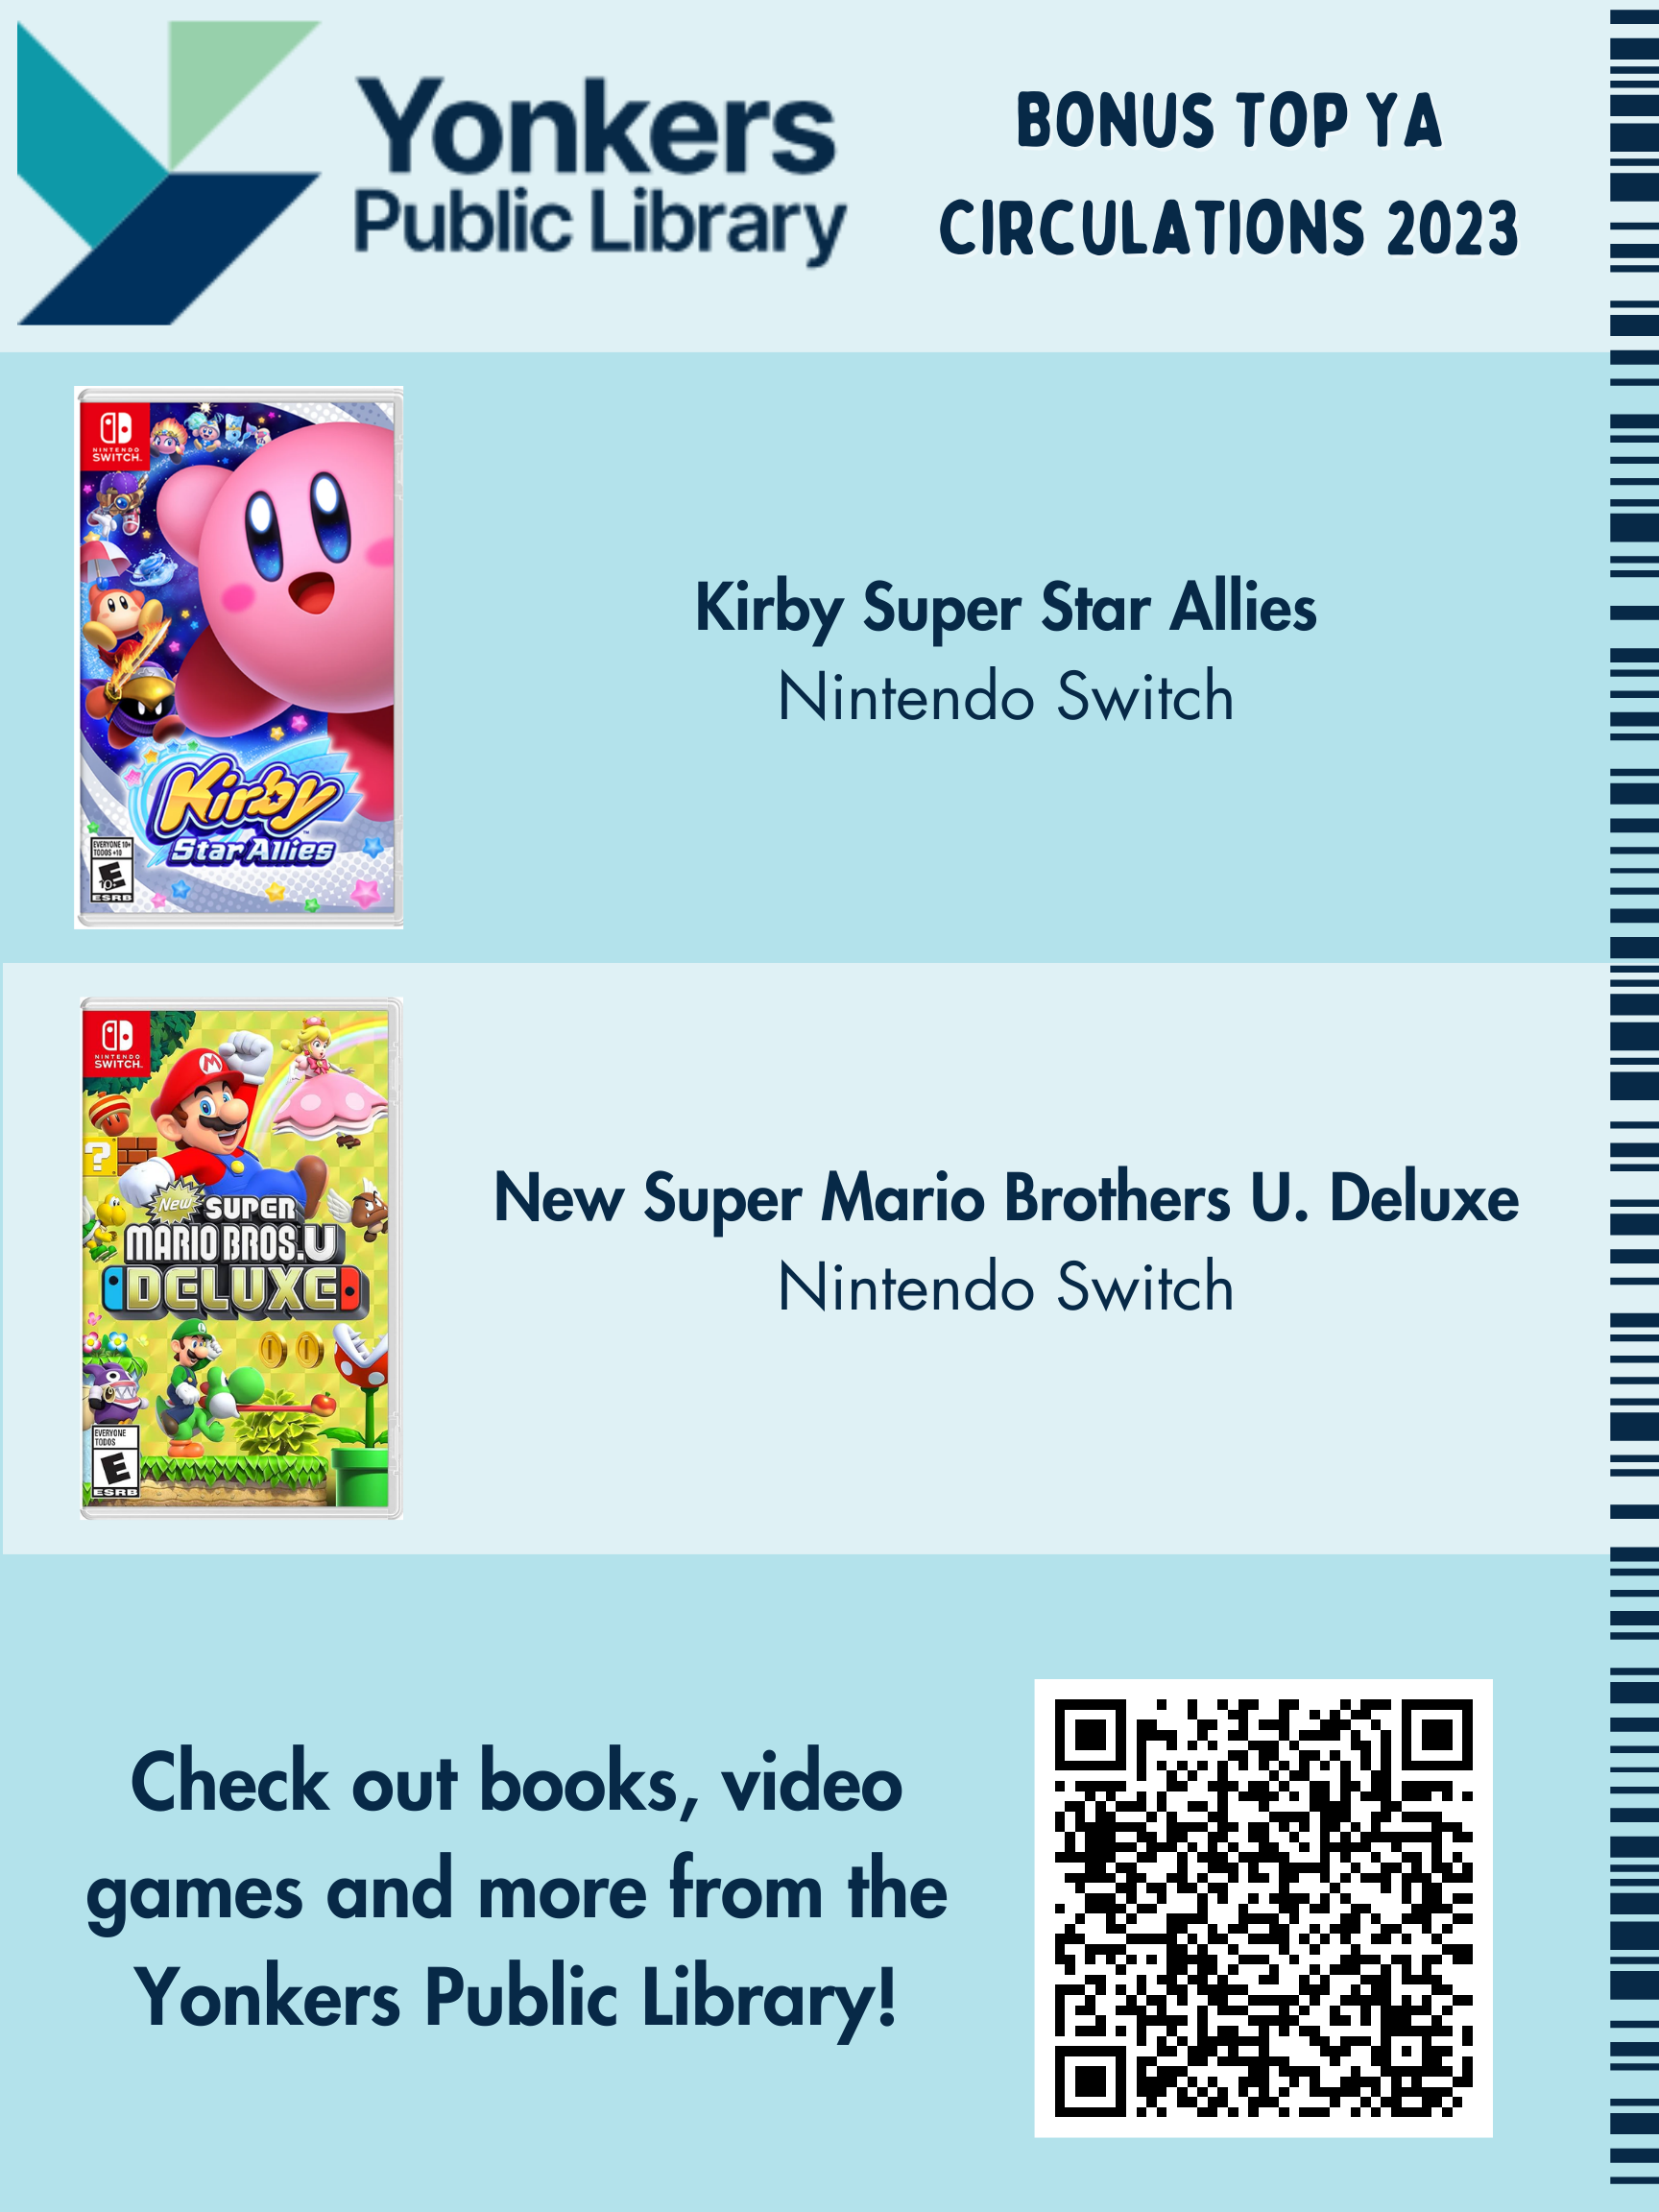 Top YA Fiction Circulations 2023. Kirby Super Star Allies and New Super Mario Bros U Deluxe.